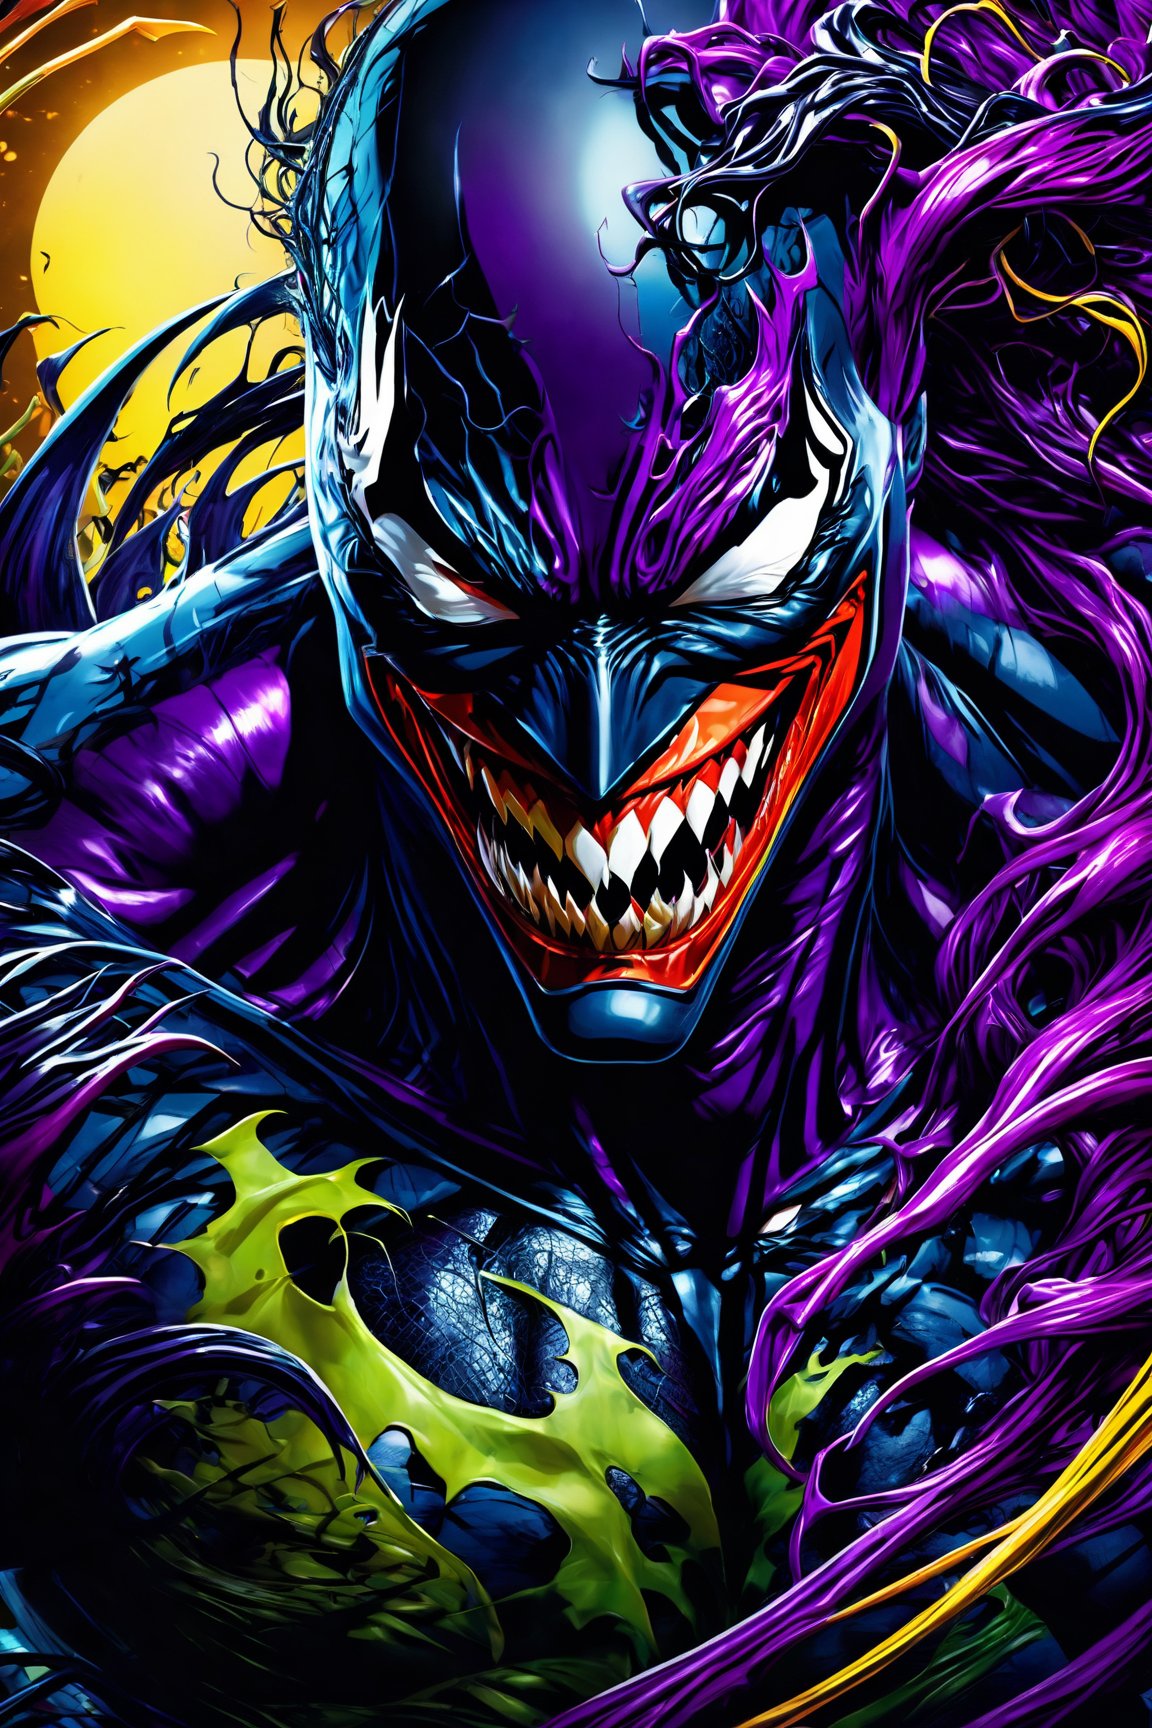 (best quality, 8K, highres, masterpiece), ultra-detailed, (Marvel-style, full figure) depiction of a hero merging with the Joker and Venom symbiote. The symbiote gracefully covers half of Joker's face, creating a captivating fusion. The color palette is dark and shaded, set in a mysterious environment illuminated by the moonlight reflecting off the Venom symbiote. The scene is wildly futuristic, blending advanced technology with the organic, offering a striking contrast between the natural and artificial elements. This high-quality image, resembling a digital painting, bursts with vibrant and vivid colors. The meticulous attention to detail captures the essence of the character's evil and mocking smile, presenting a visually stunning and intriguing portrayal.